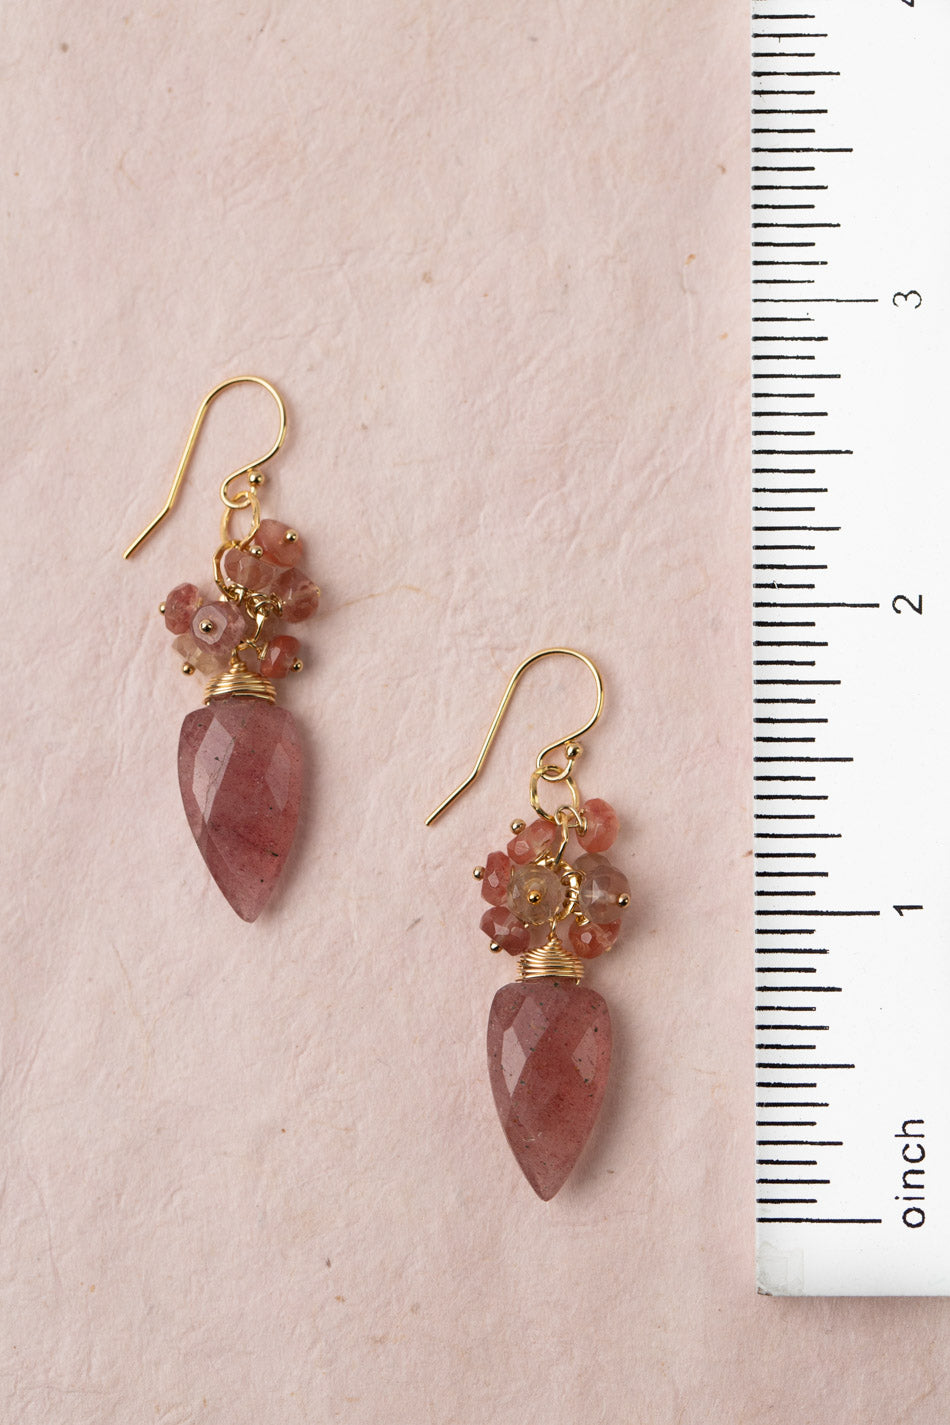 Divinity Andesine With Strawberry Quartz Arrowhead Shaped Briolette Cluster Earrings